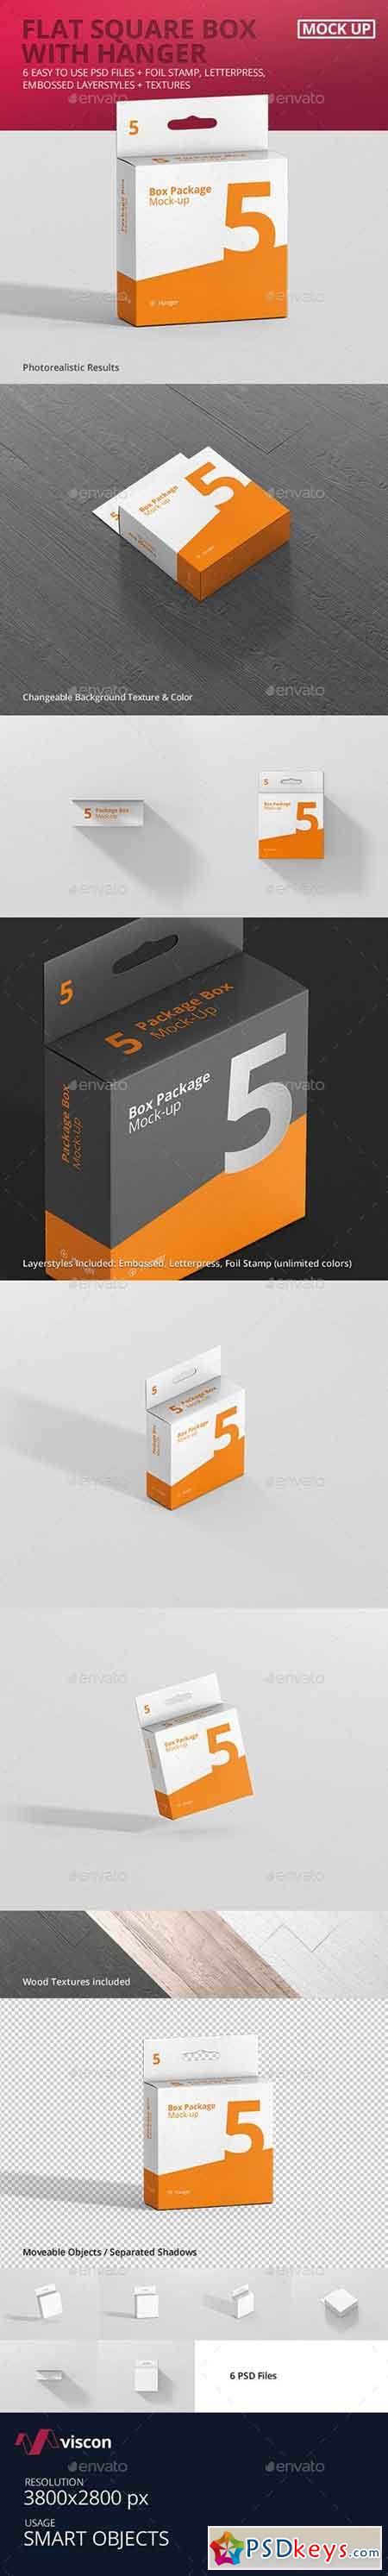 Package Box Mock-Up - Flat Square with Hanger 18069484